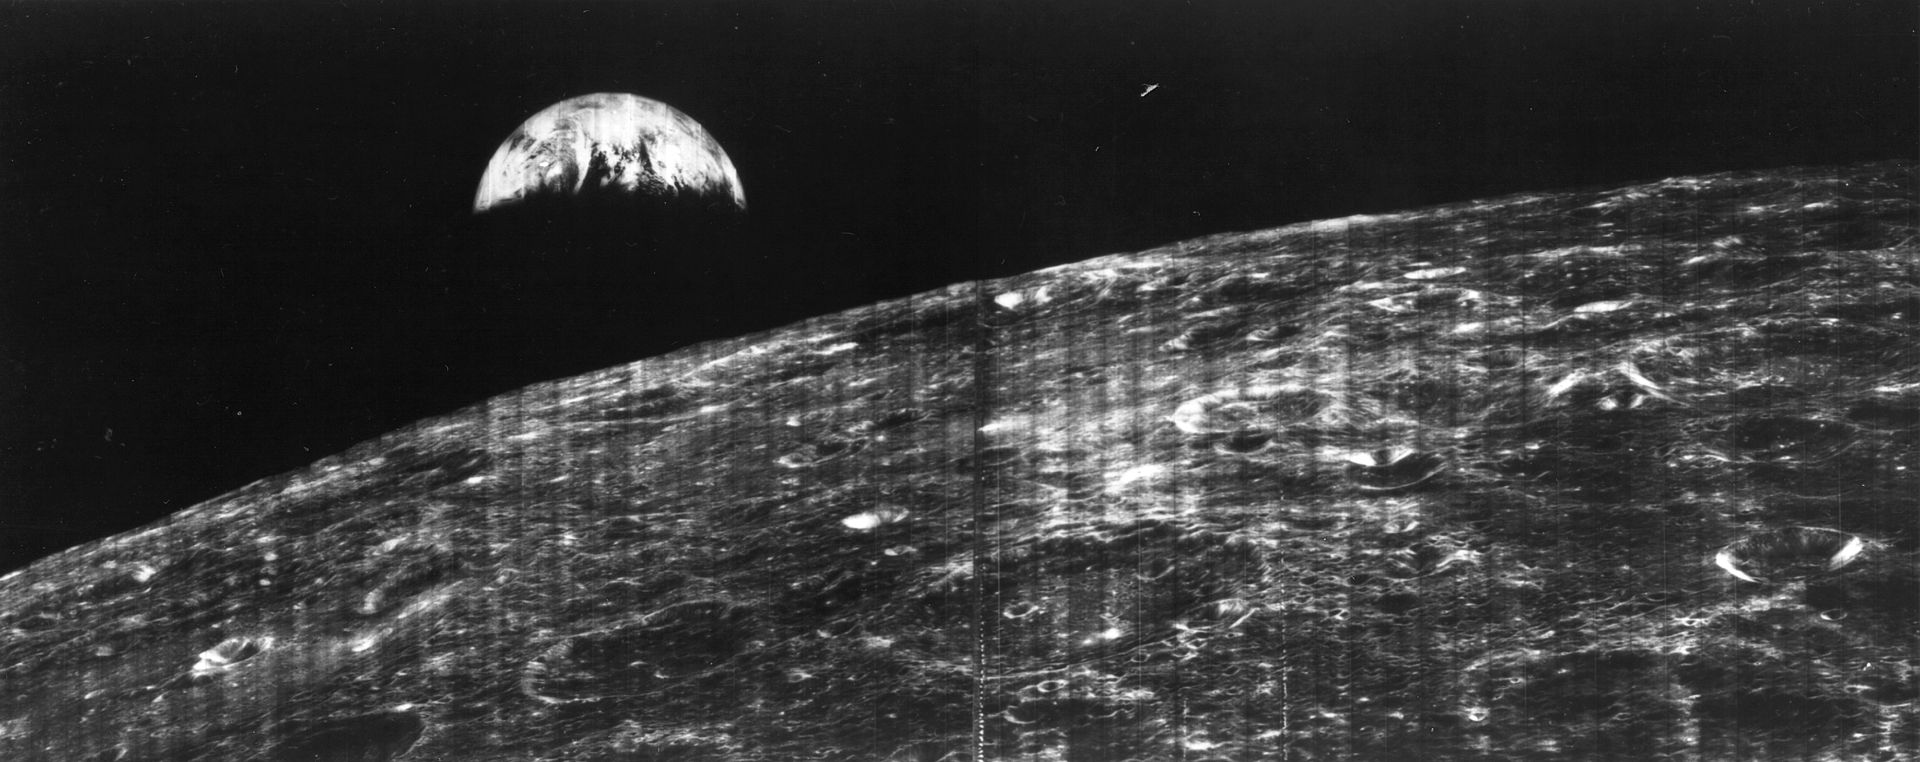 The grainy significance of this image, acquired by Lunar Orbiter-1 on 23 August 1966, is that it is the very first view of Earth, as seen from lunar distance. At the time, the spacecraft was on its 16th orbit around the Moon. Photo Credit: NASA